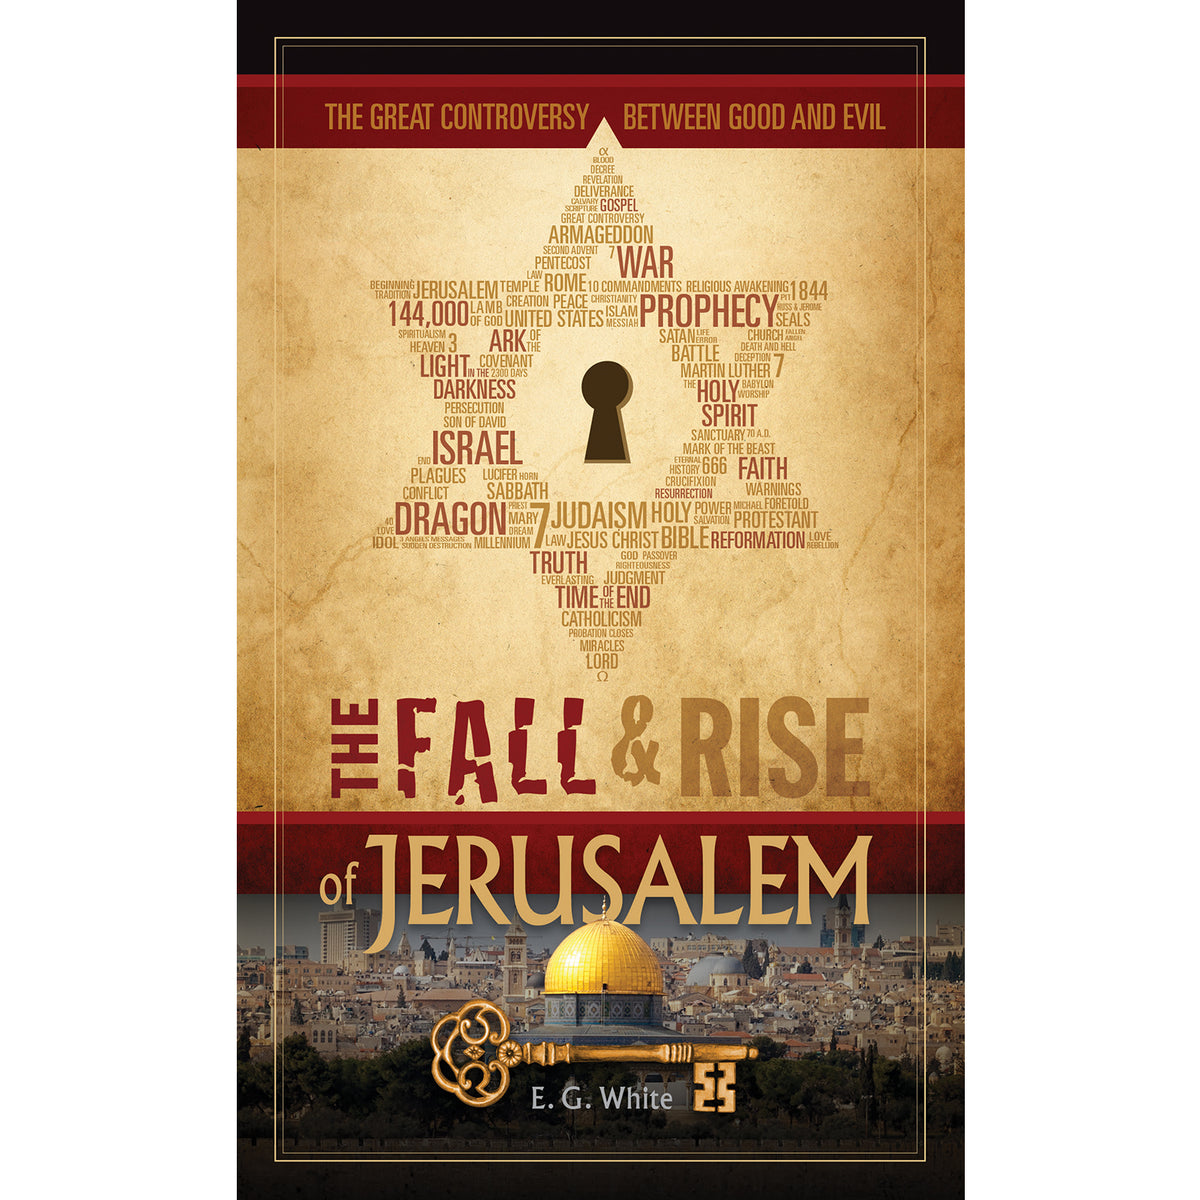 The Fall and Rise of Jerusalem: The Great Controversy Between Good and Evil. By Ellen White